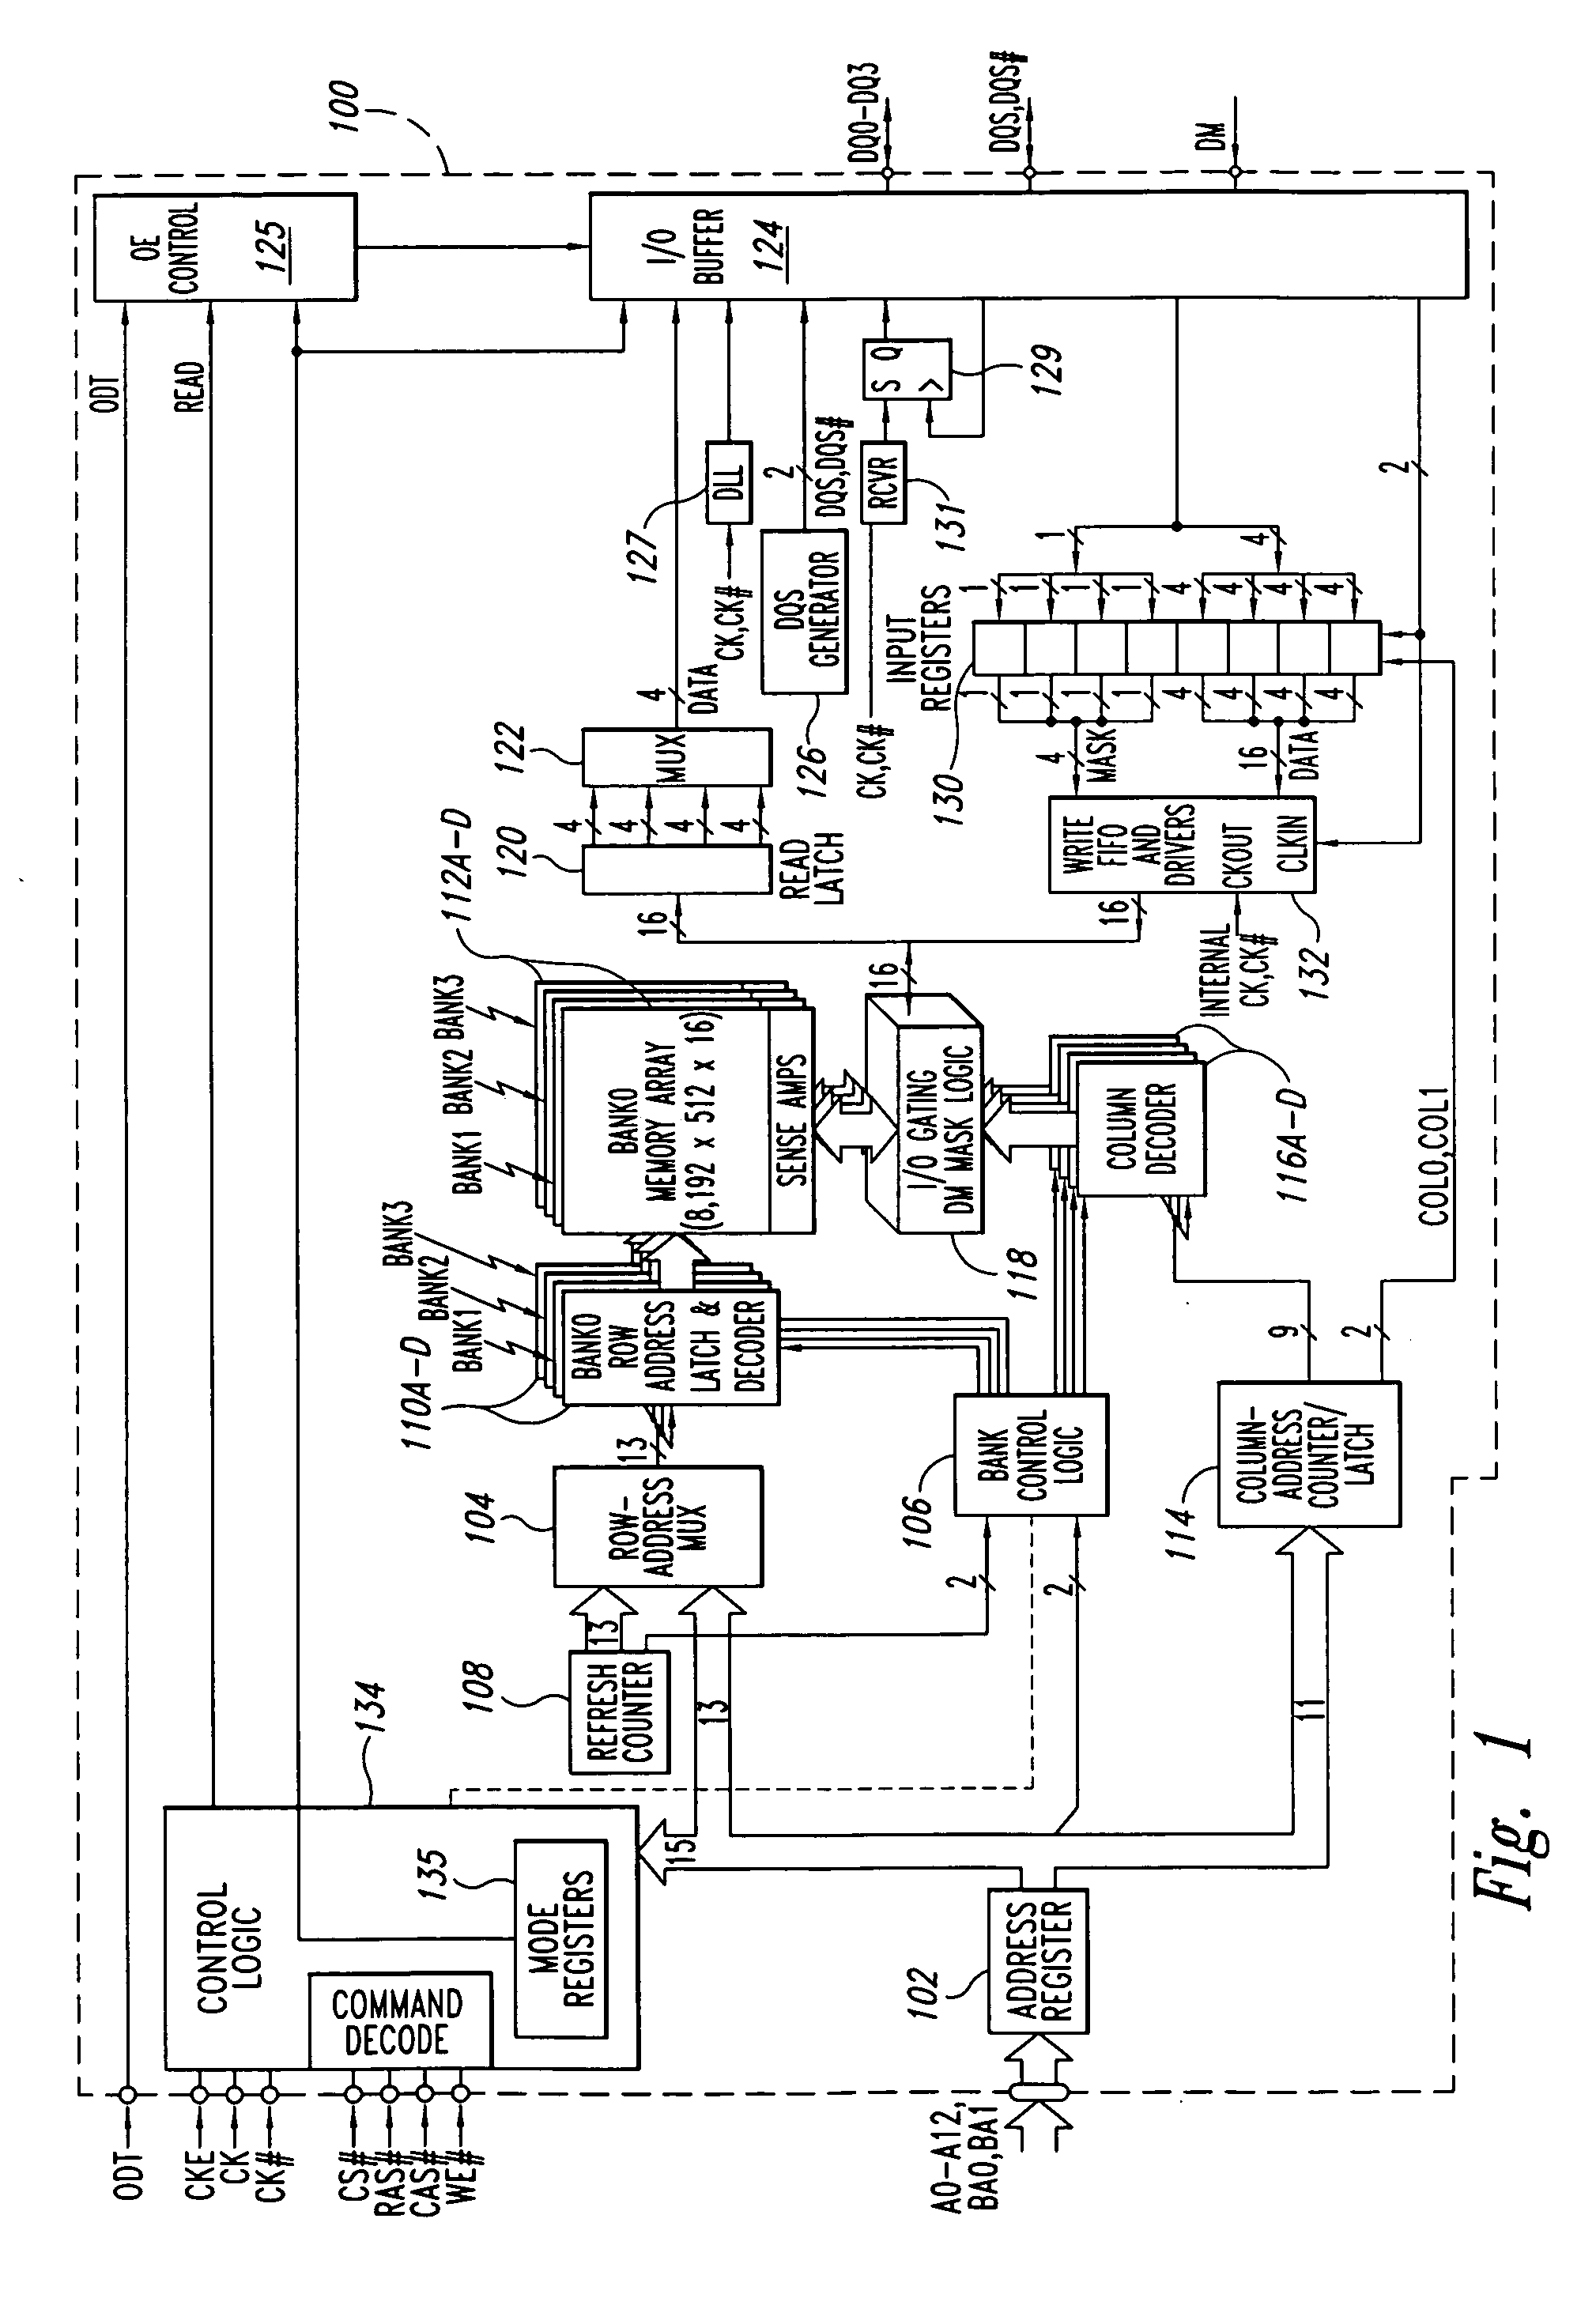 Apparatus and method for independent control of on-die termination for ouput buffers of a memory device